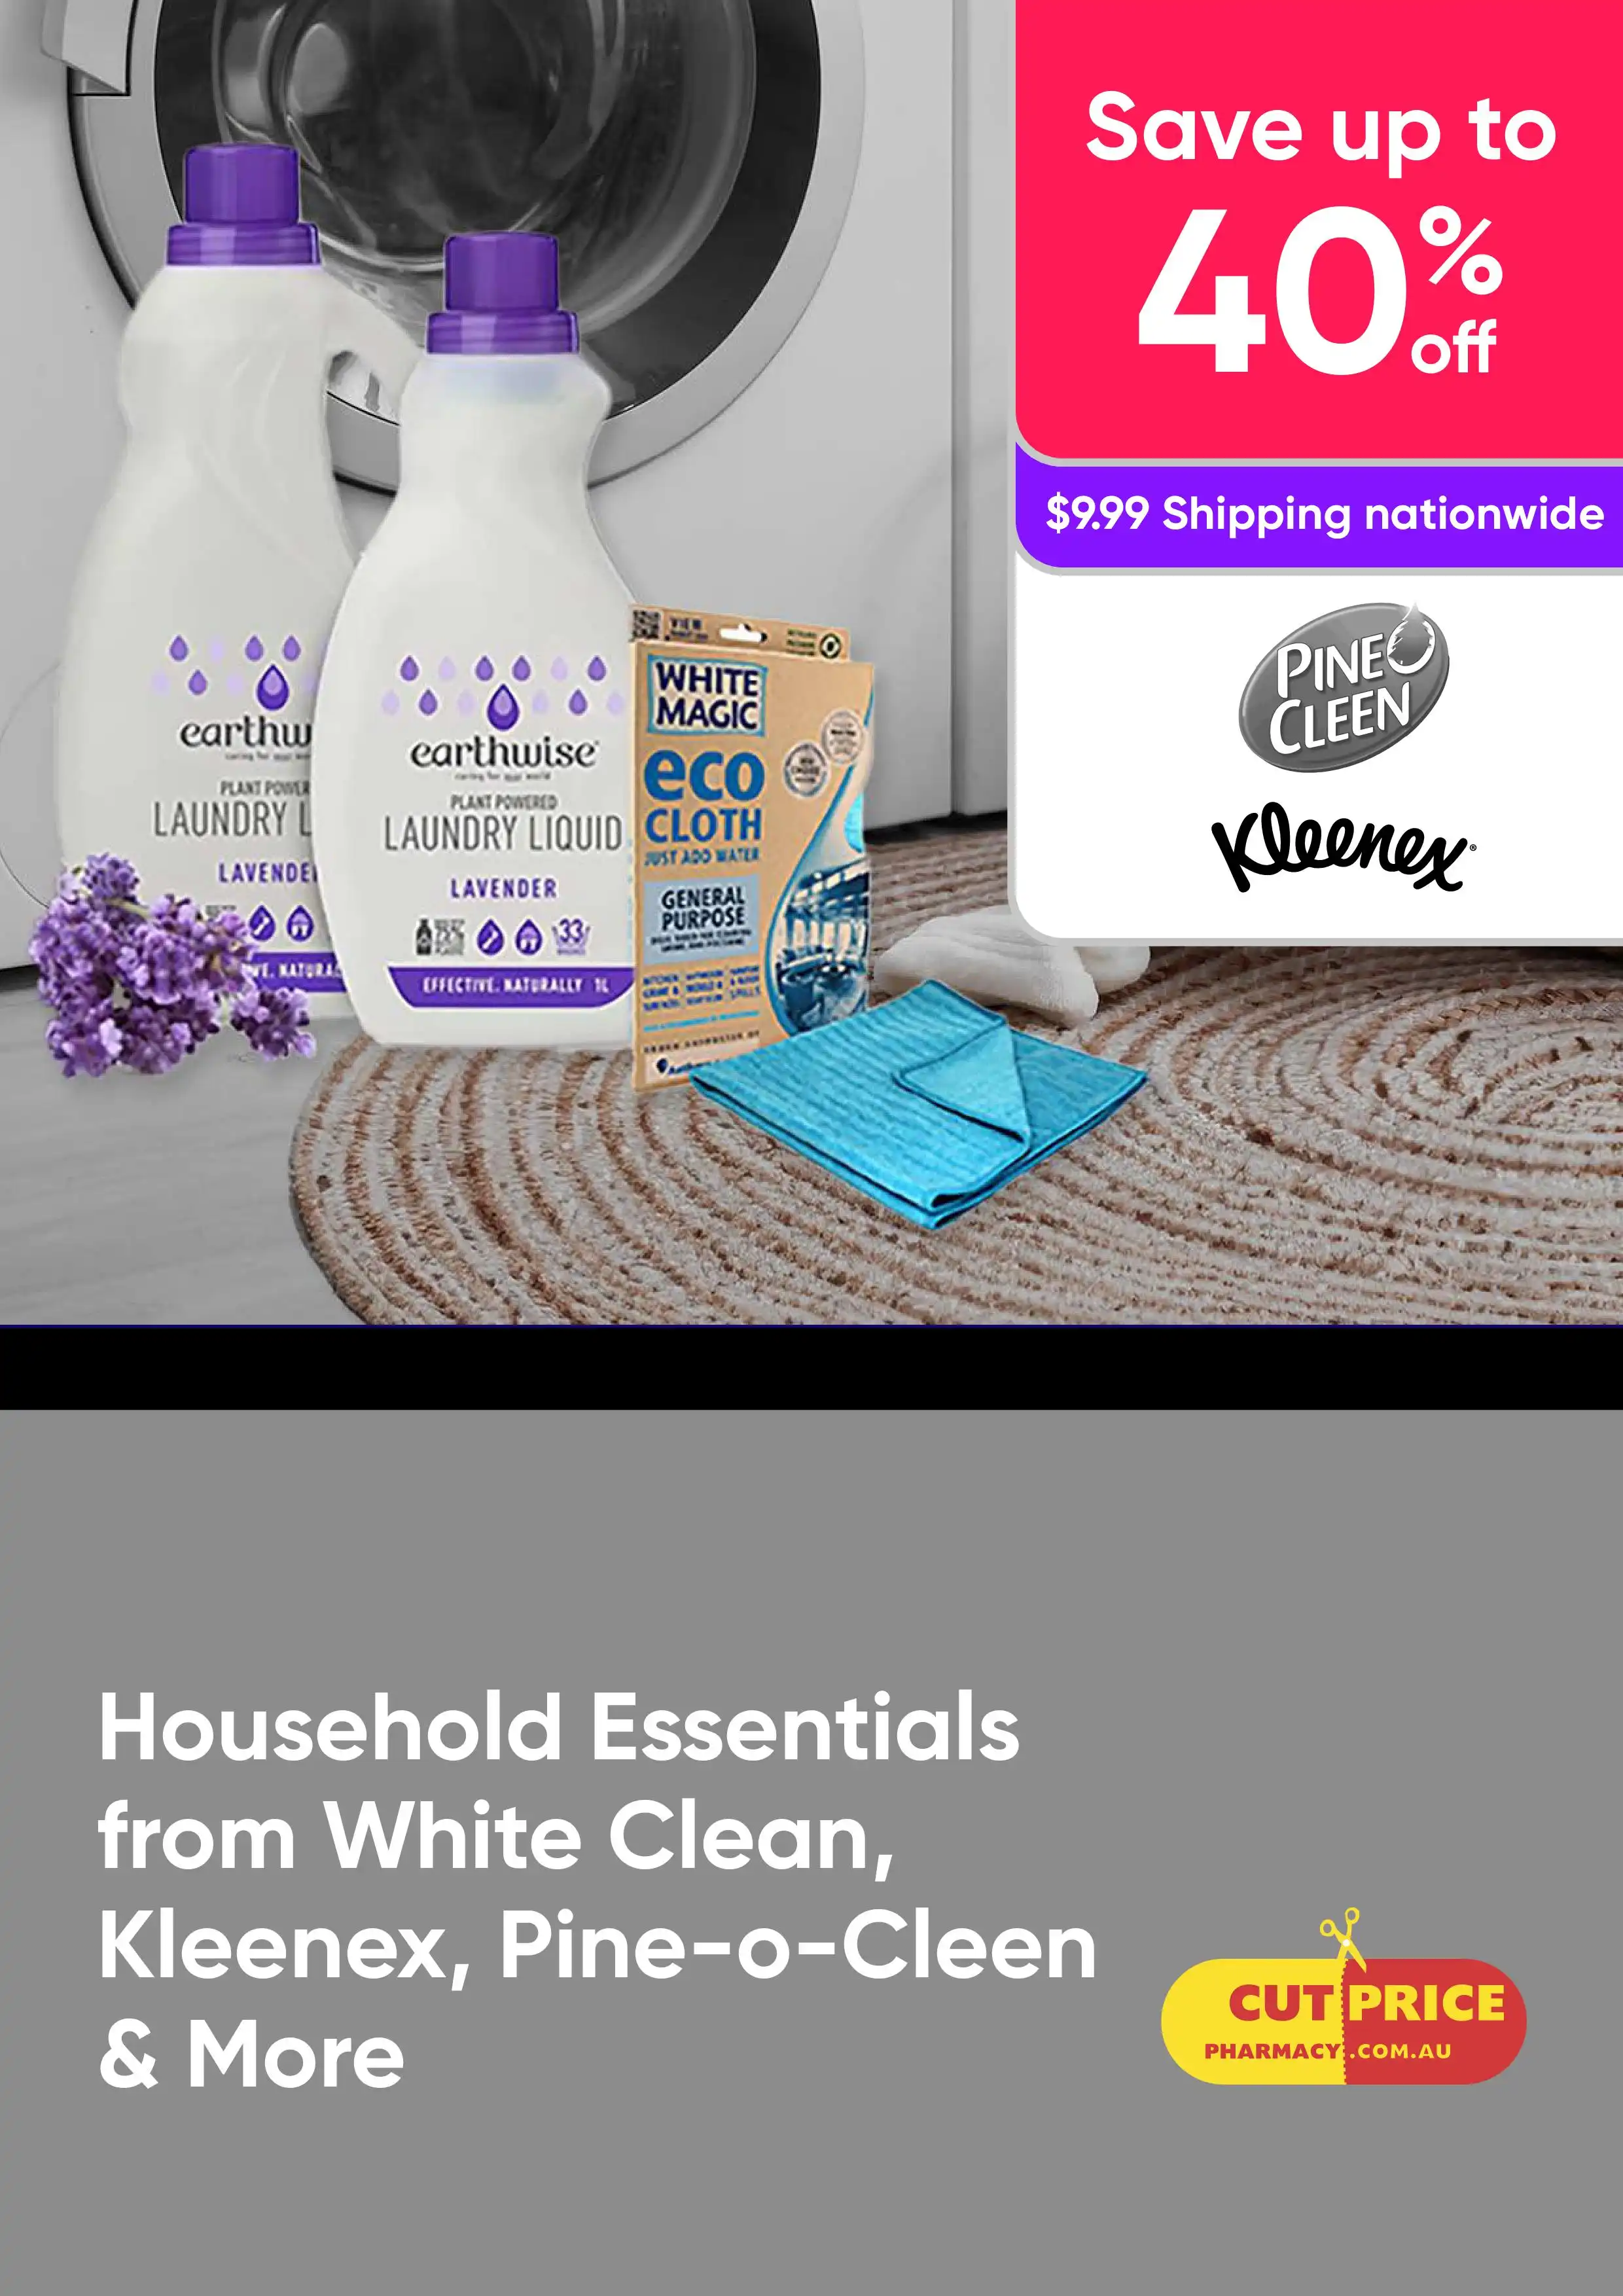 Save 40% on Household Essentials from White Clean, Pine-o-Clean, Kleenex & More